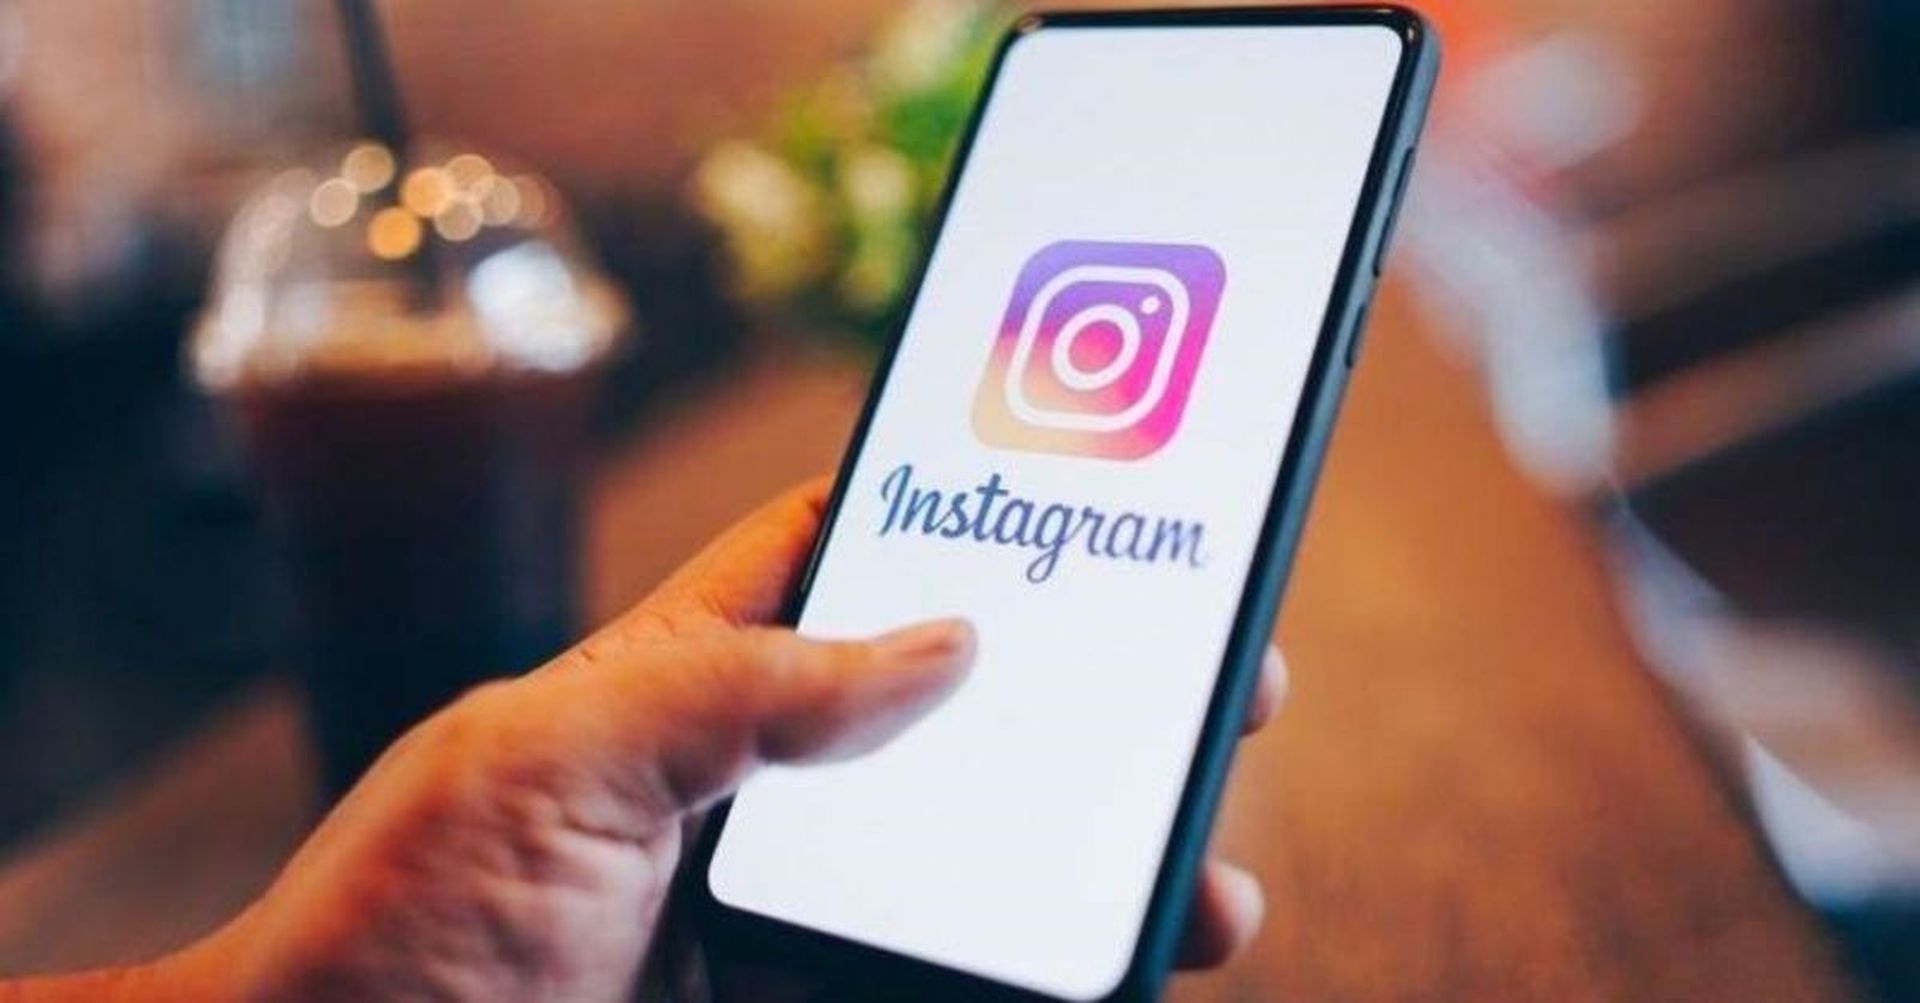 Instagram message recovery explained